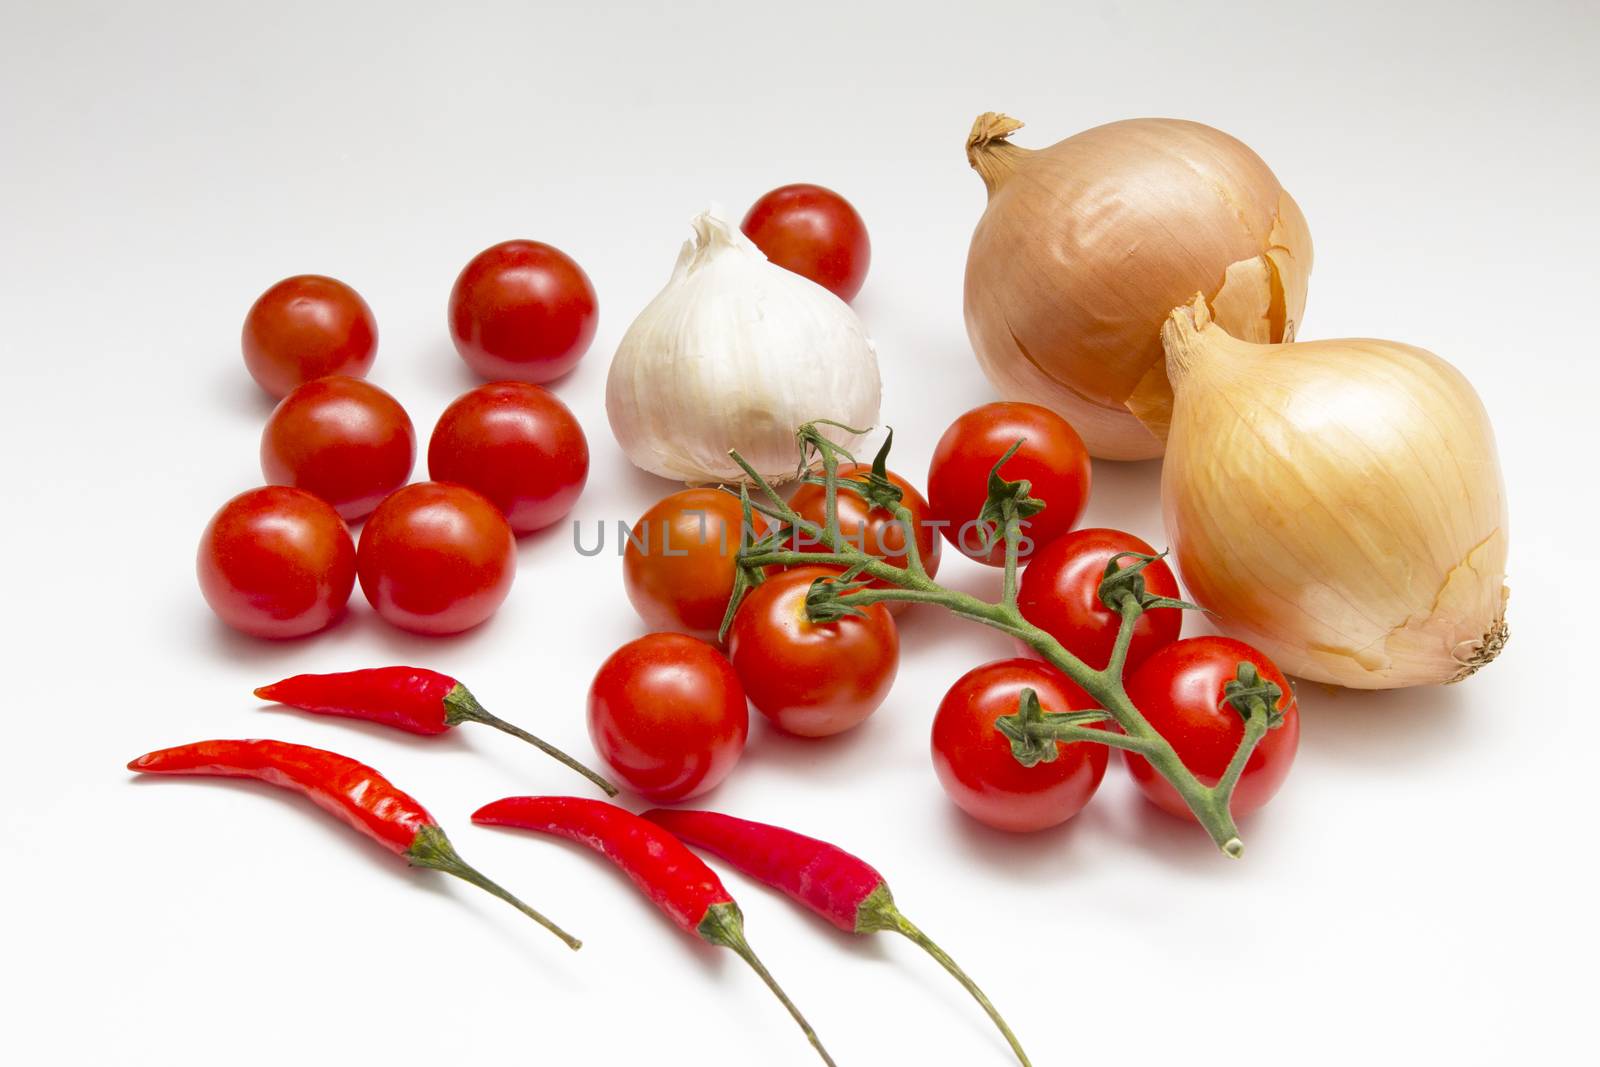 Onions,Tomatoes, Chillies, Garlic by magicbones